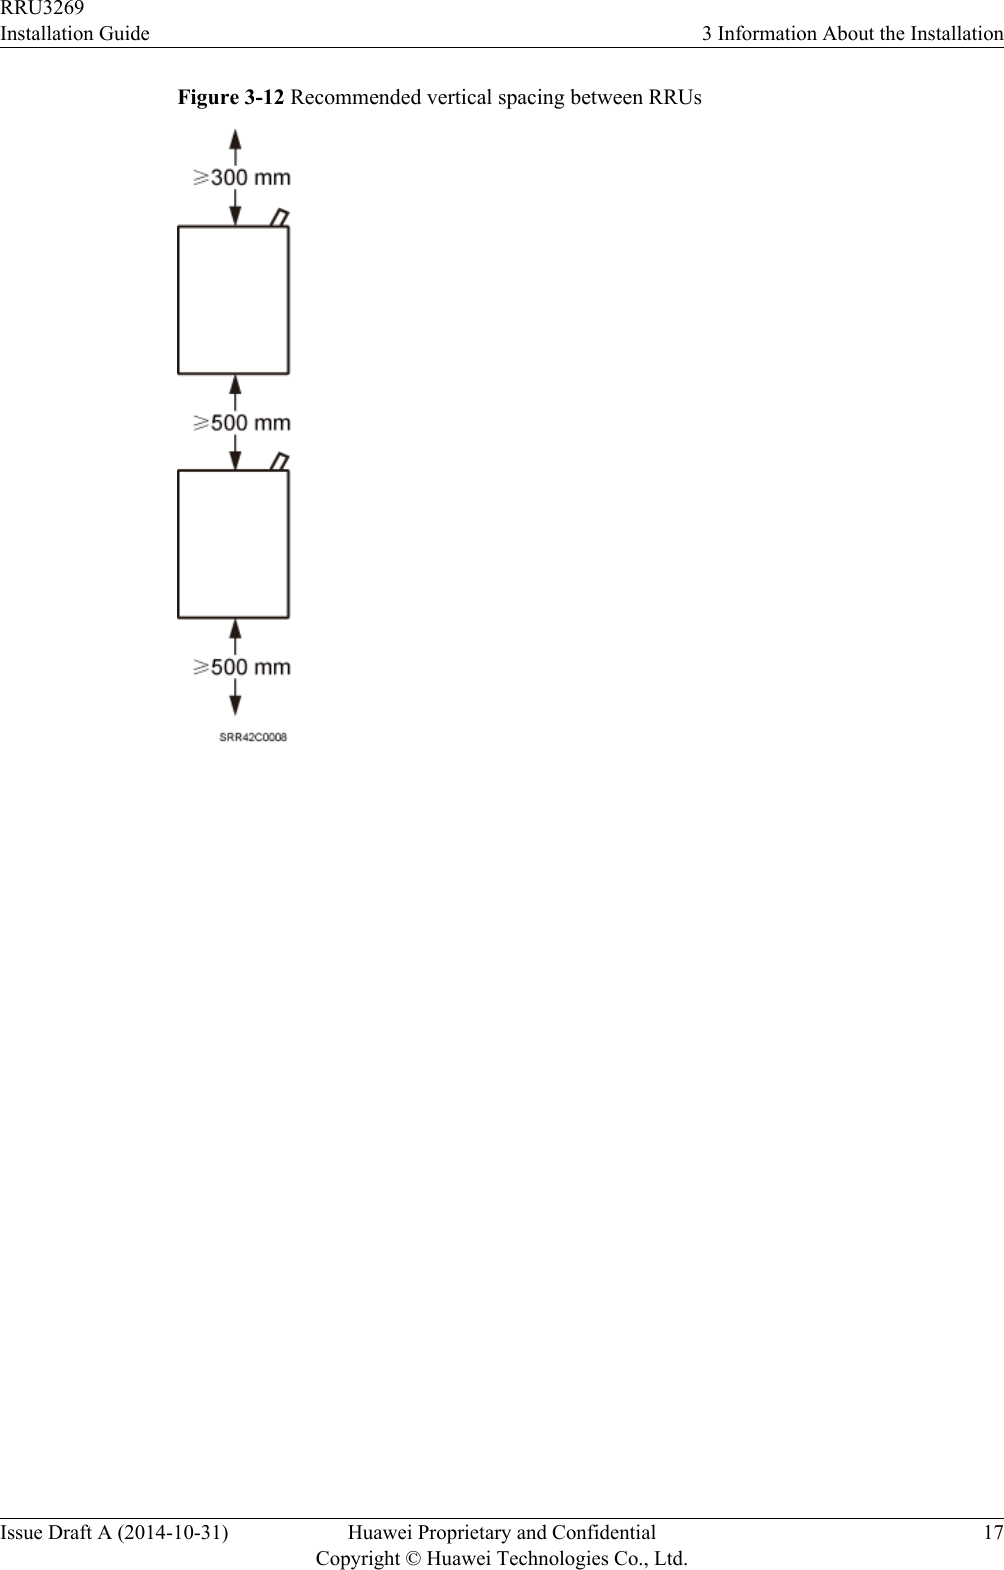 Figure 3-12 Recommended vertical spacing between RRUsRRU3269Installation Guide 3 Information About the InstallationIssue Draft A (2014-10-31) Huawei Proprietary and ConfidentialCopyright © Huawei Technologies Co., Ltd.17